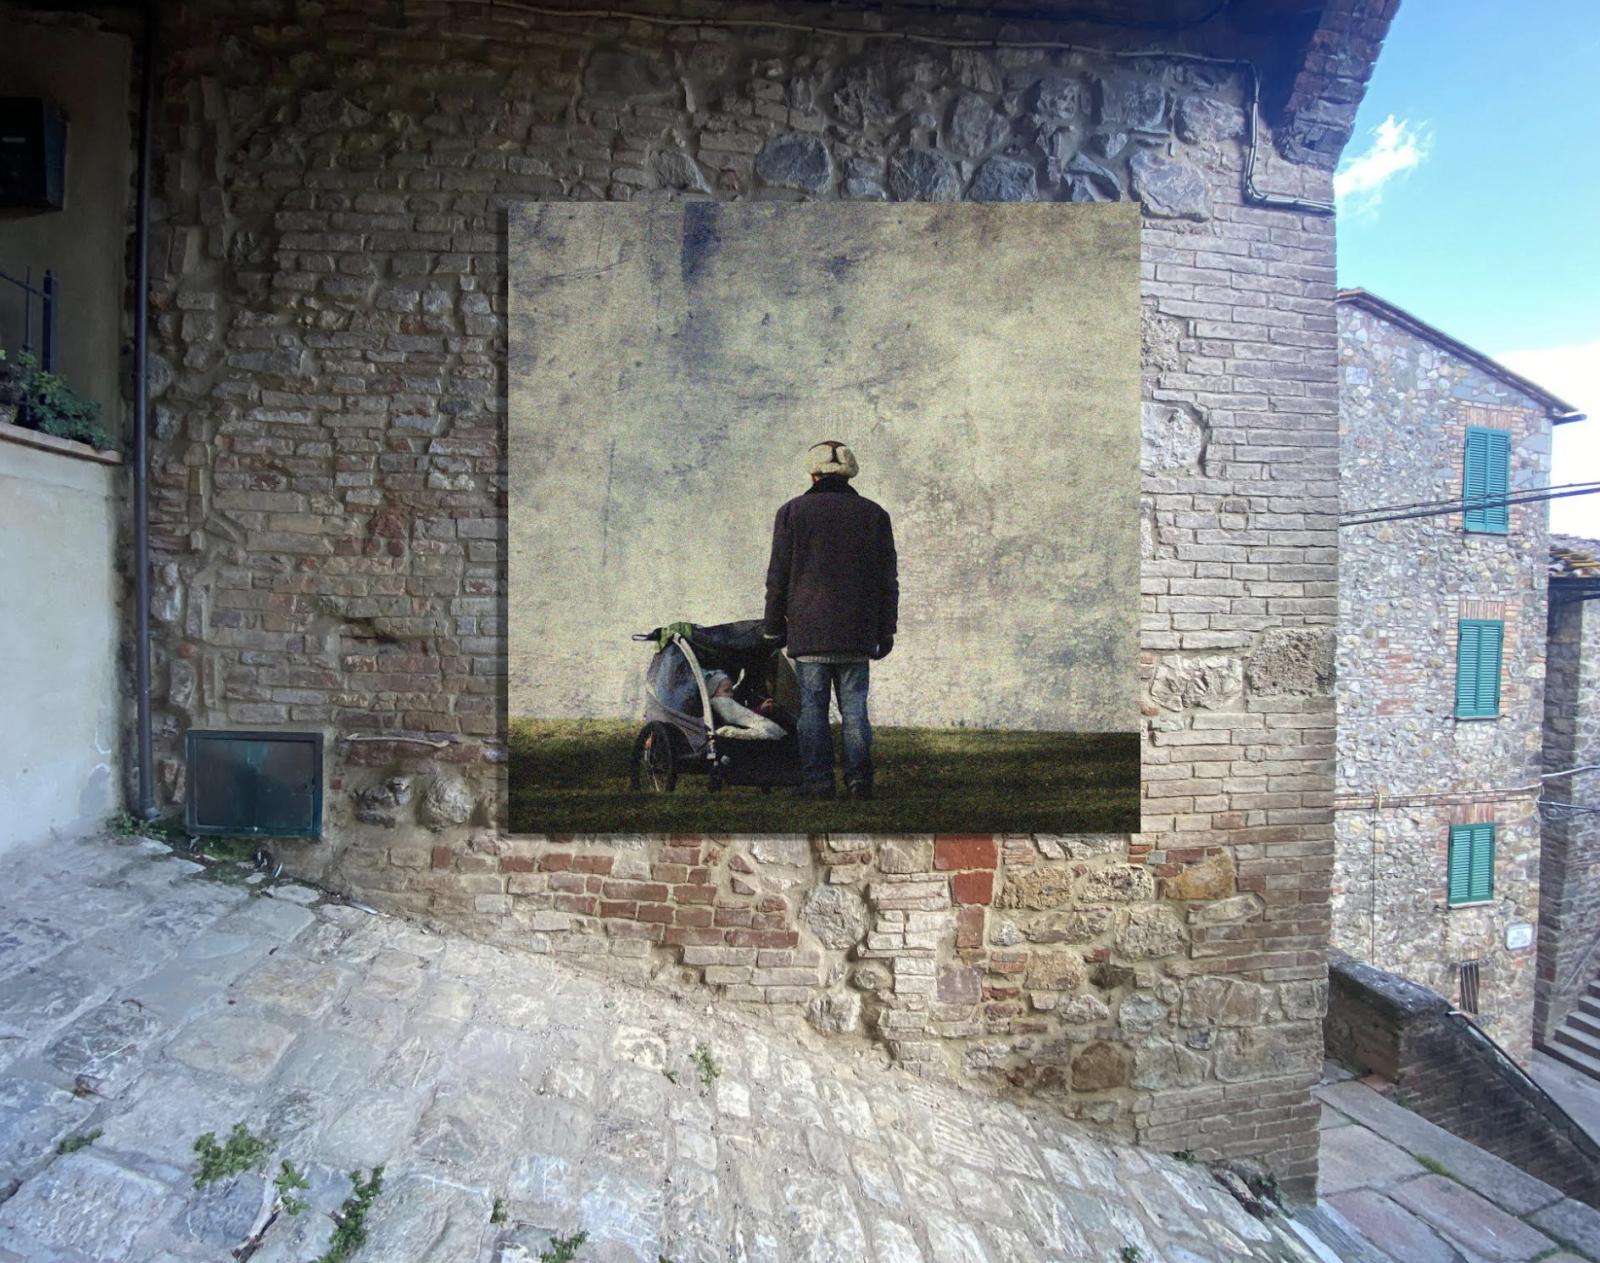 SIENA AWARDS Open Air Exhibiton with a photo artwork by Michael Nguyen 